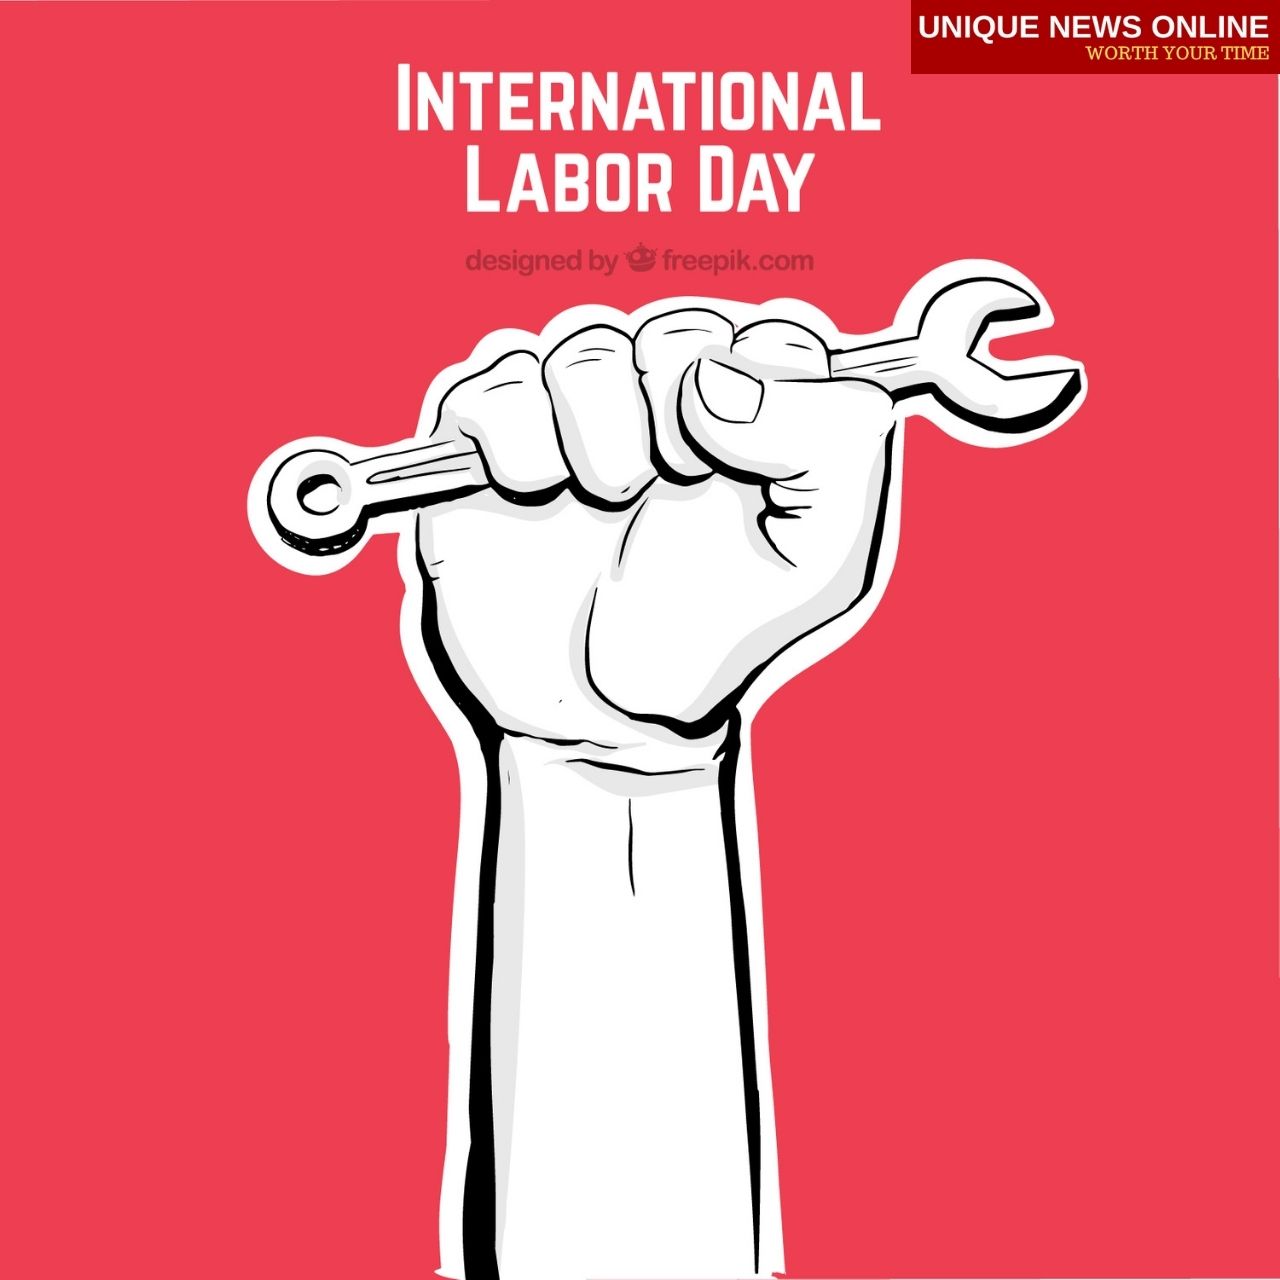 International Workers' Day 2021 Theme, Quotes, Wishes, and Images